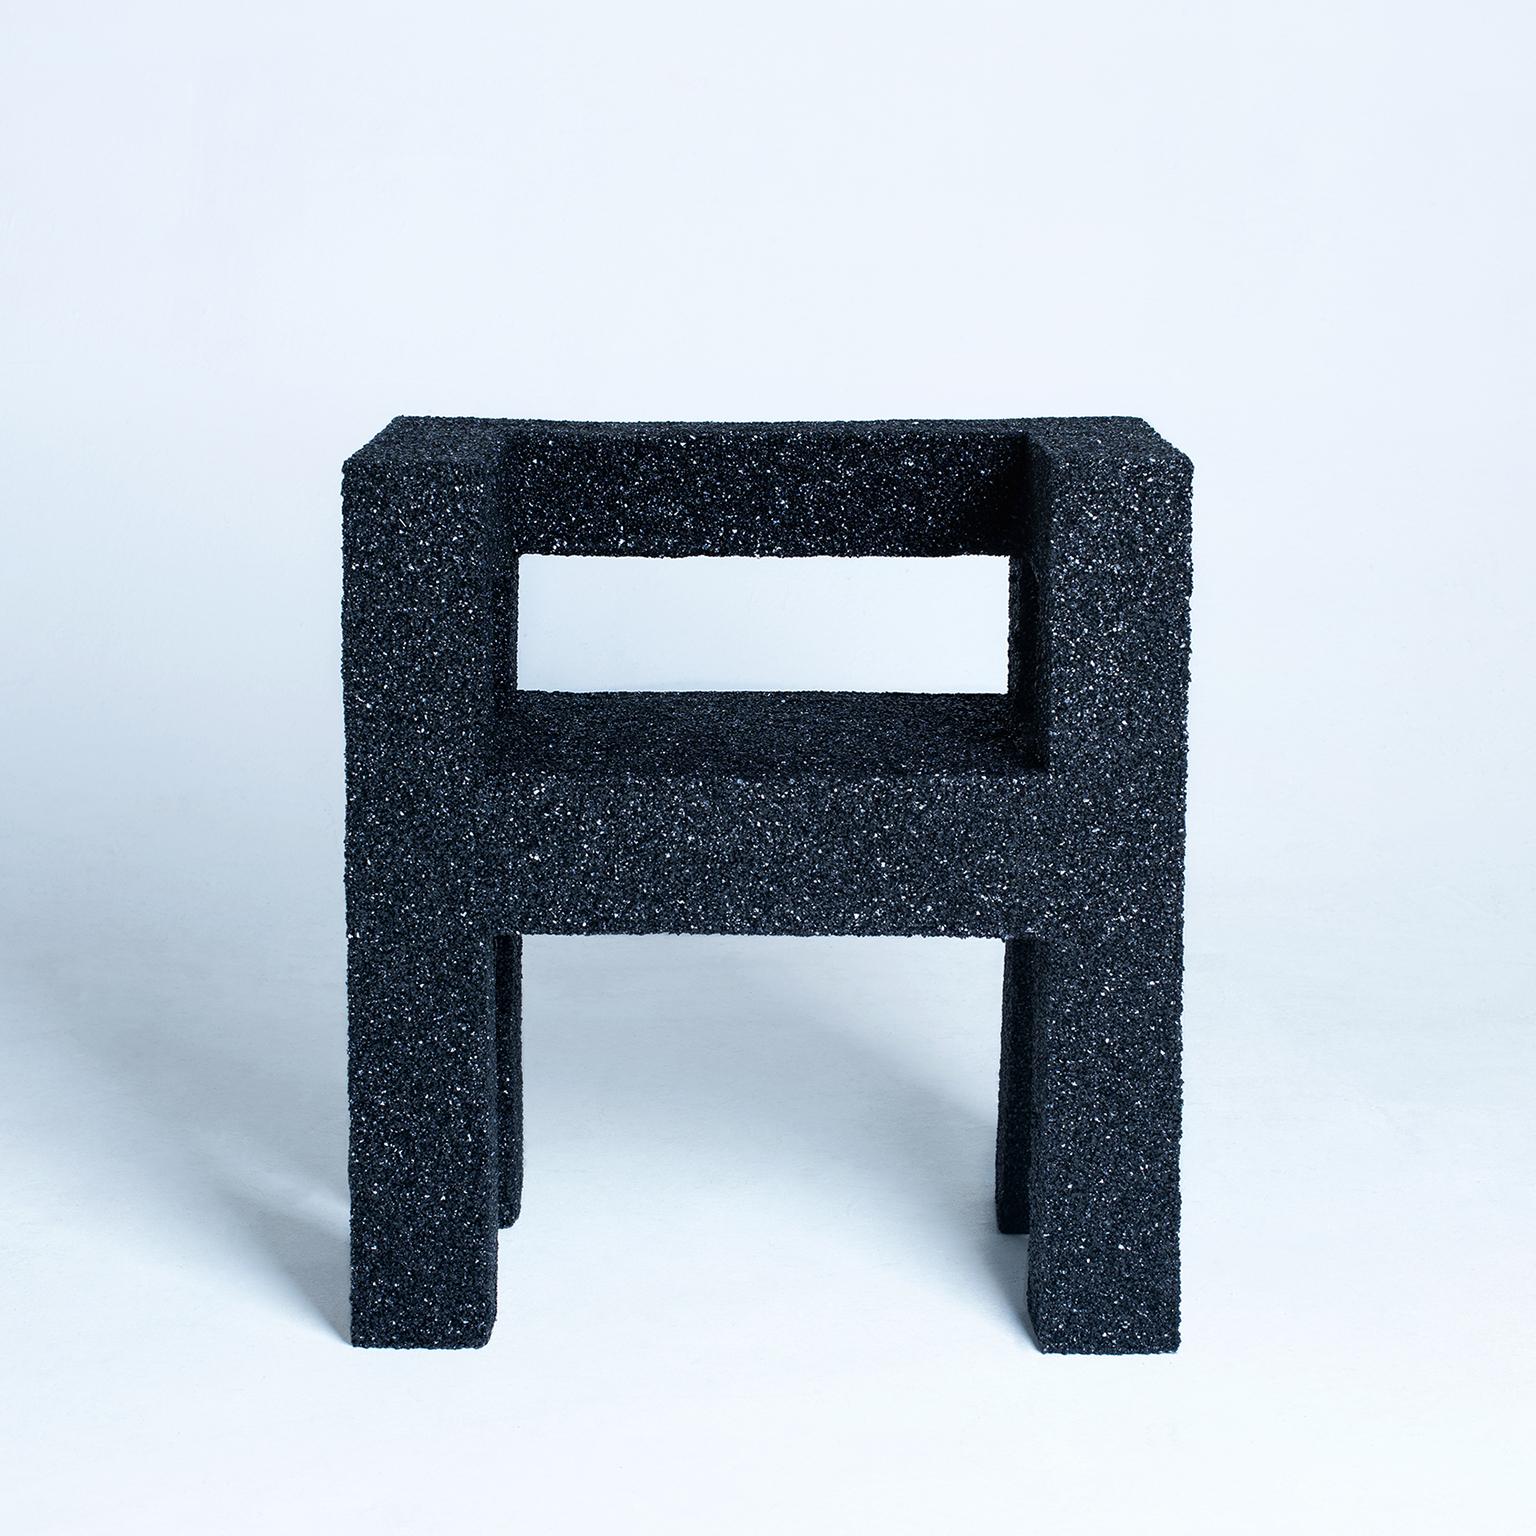 Brutalist Contemporary Chair One by Aufgabe Null, 2020 For Sale